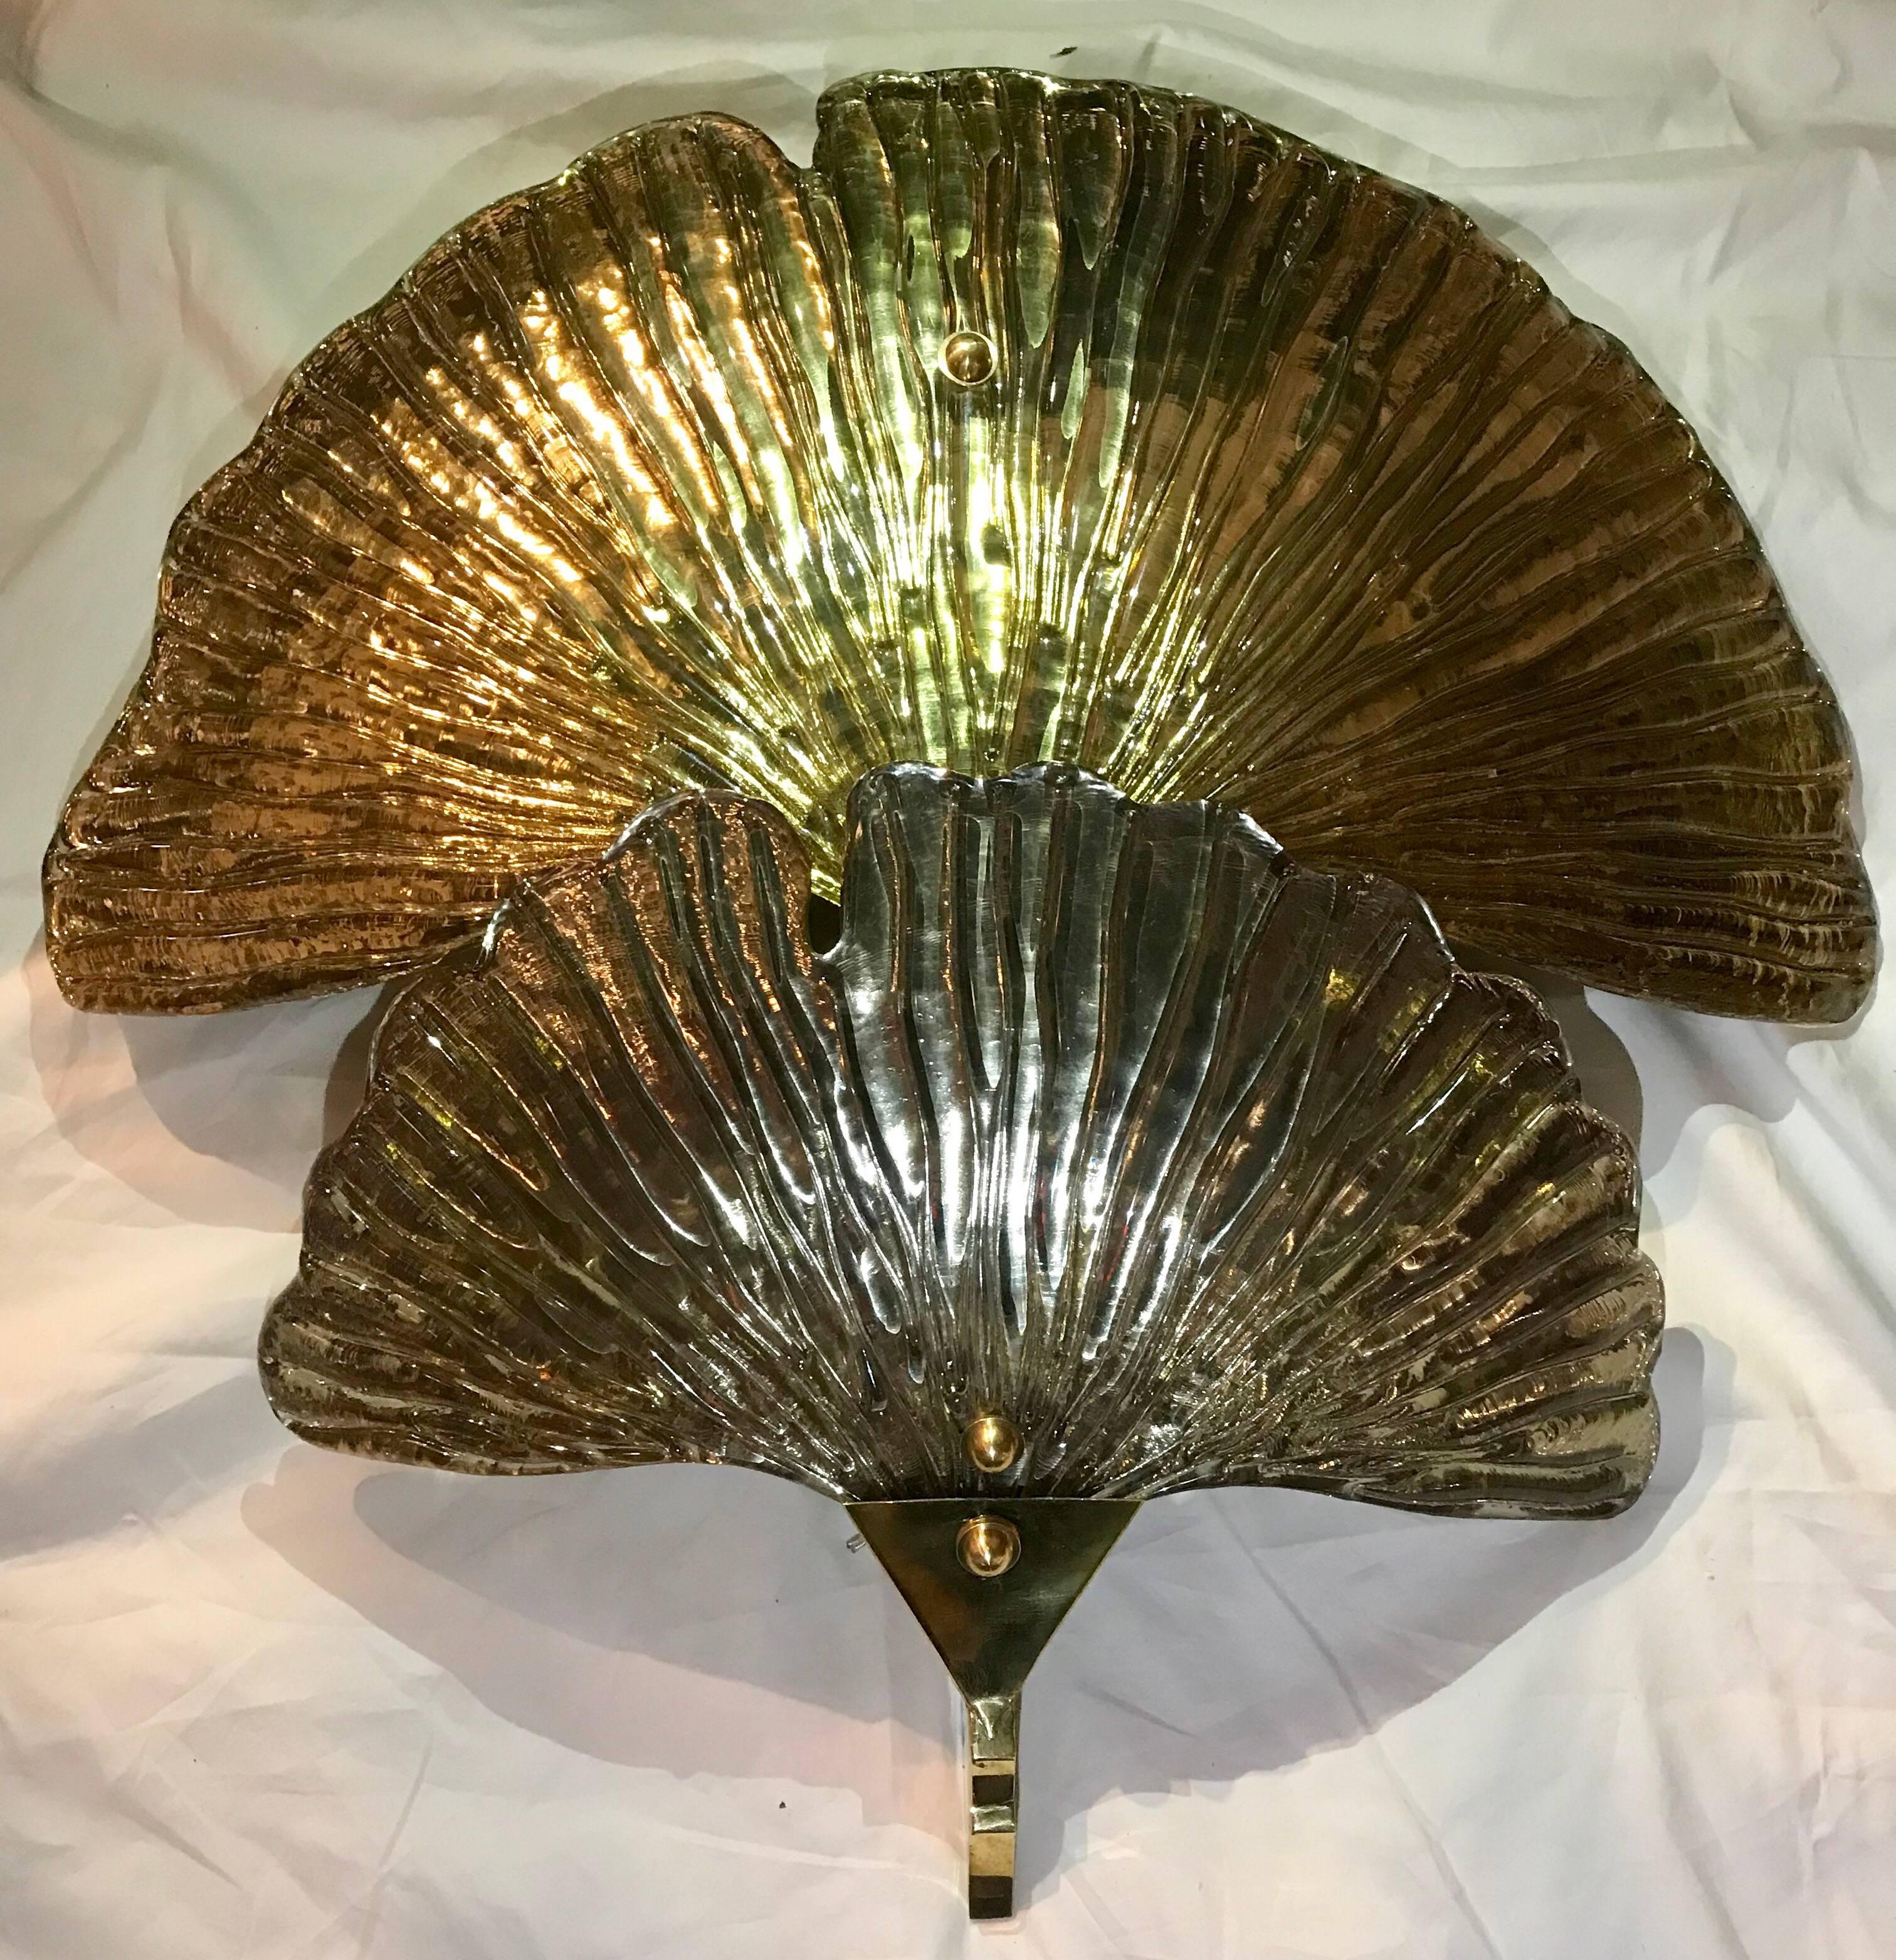 Pair of Murano glass two tier gingko leaf sconces with one silvered gingko leaf, and the other gingko gold leafed, on a brass support. There is a subtle green hue when lit due to the thickness of the natural glass color. A signature was not found